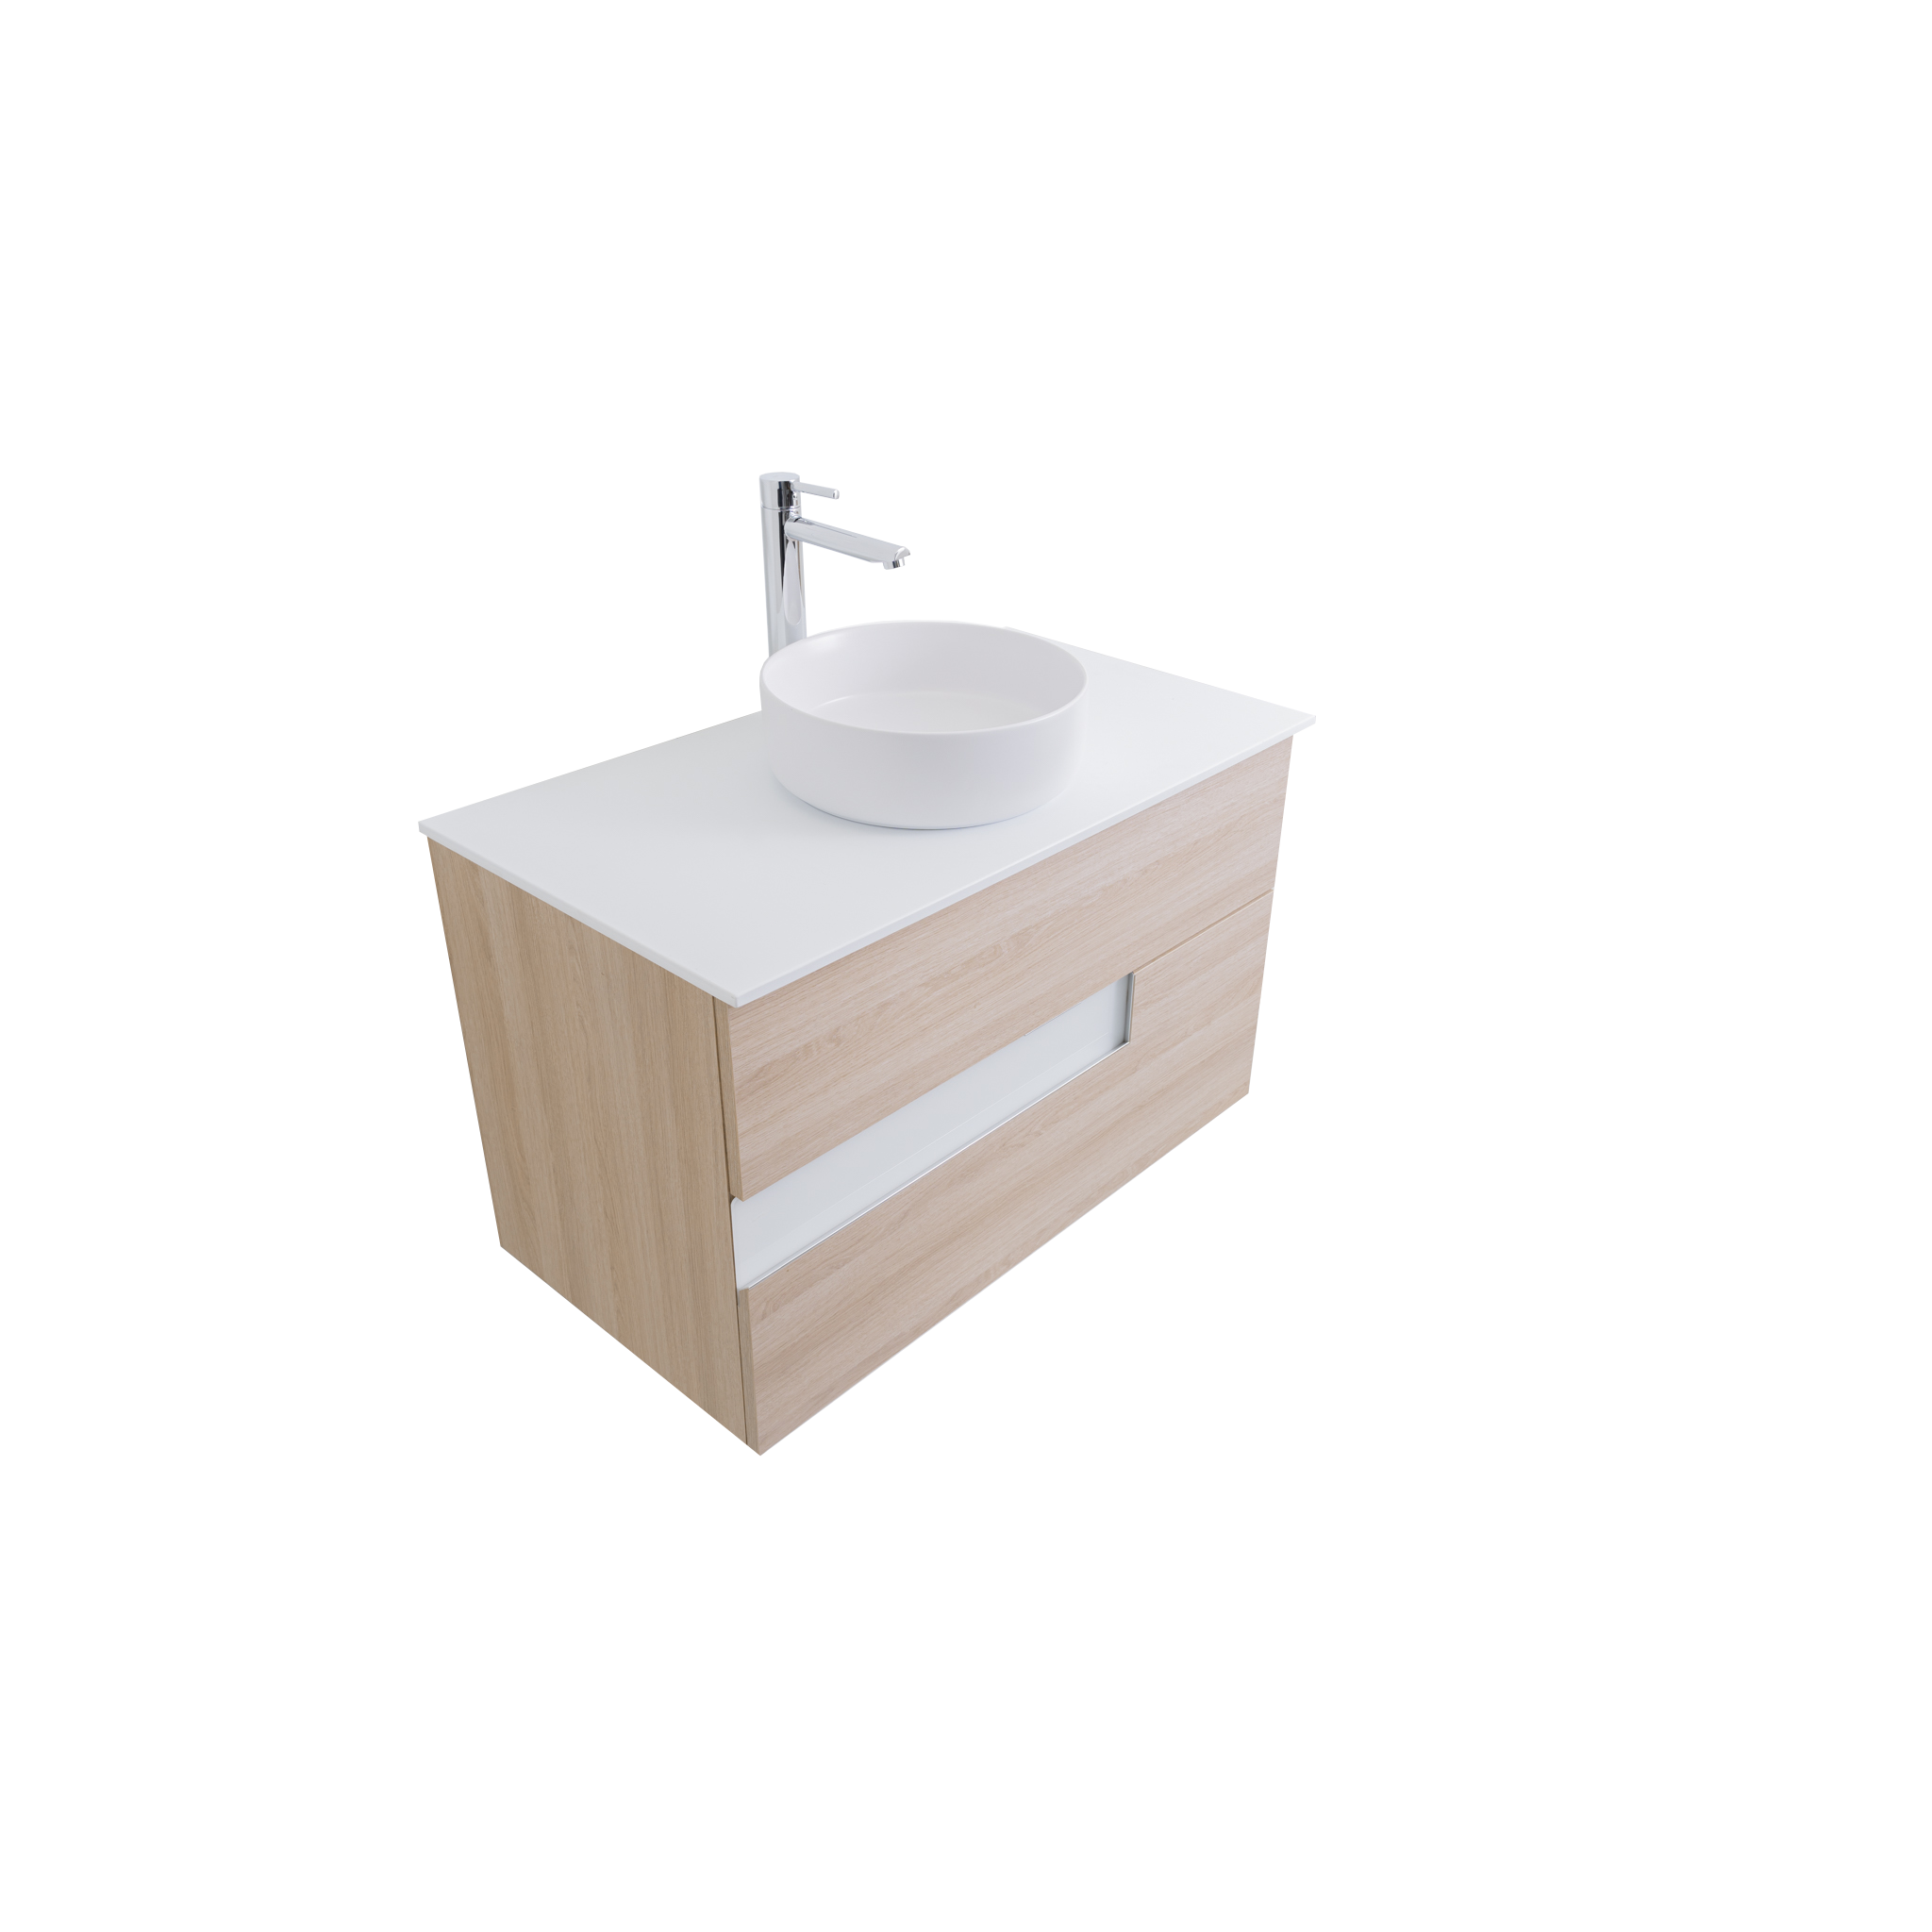 Vision 39.5 Natural Light Wood Cabinet, Ares White Top And Ares White Ceramic Basin, Wall Mounted Modern Vanity Set